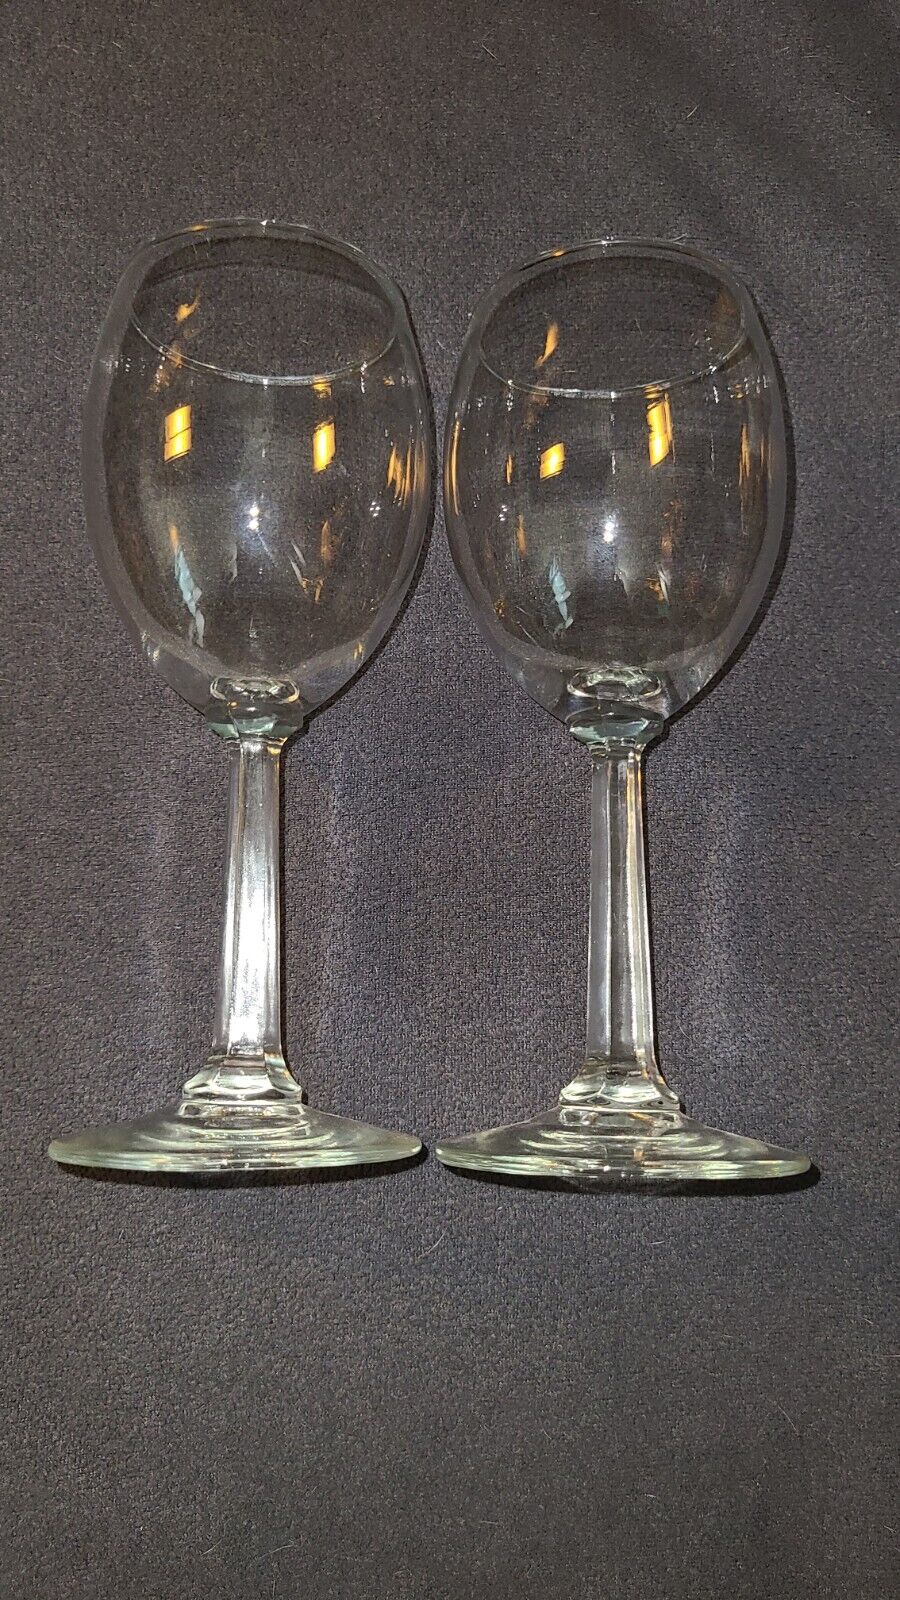 Wine Glasses, Set of 2, Manufacturer Unknown 